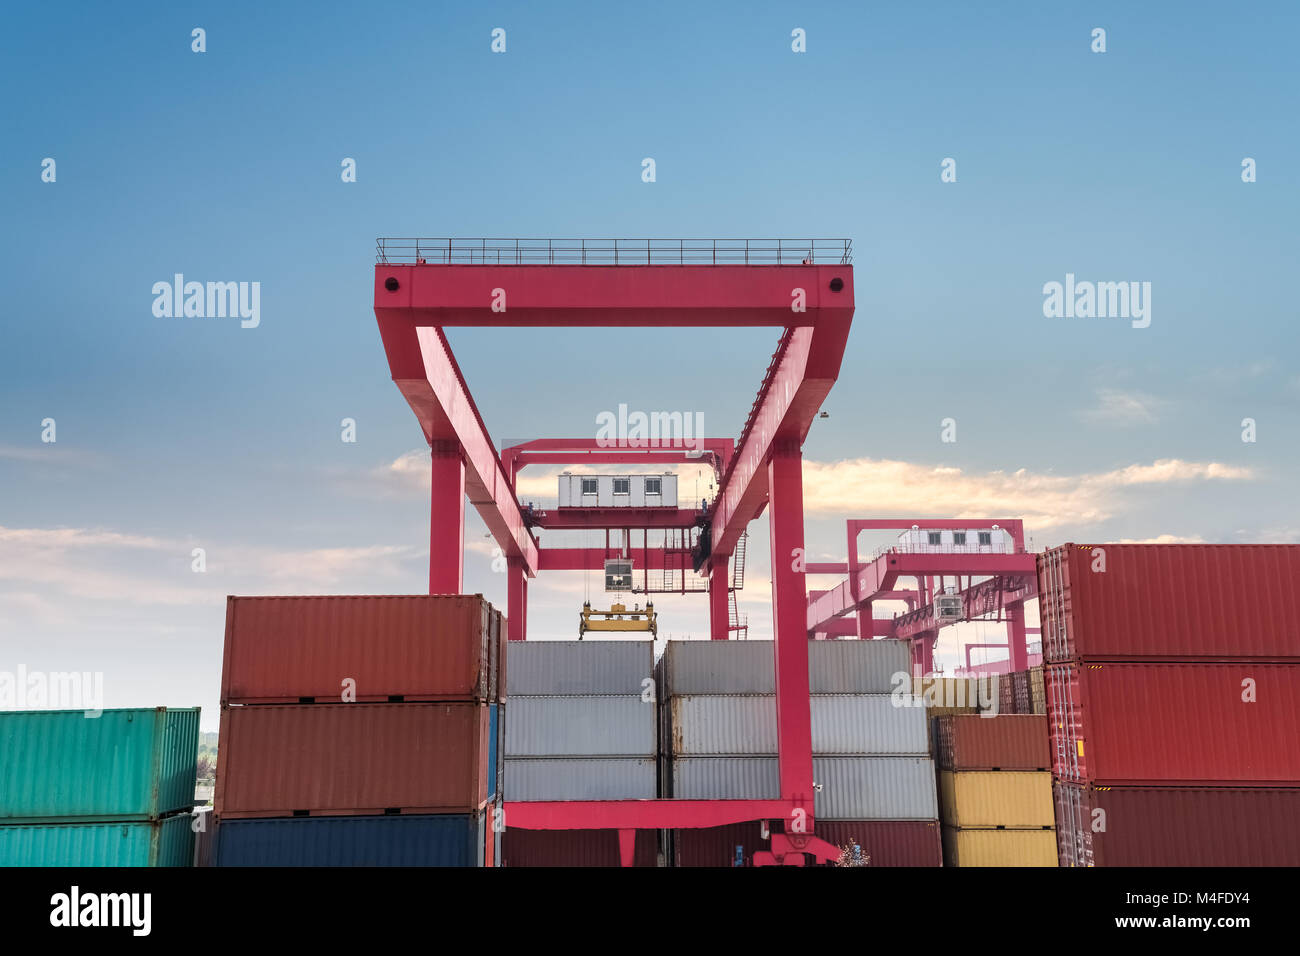 shipping containers with gantry crane Stock Photo